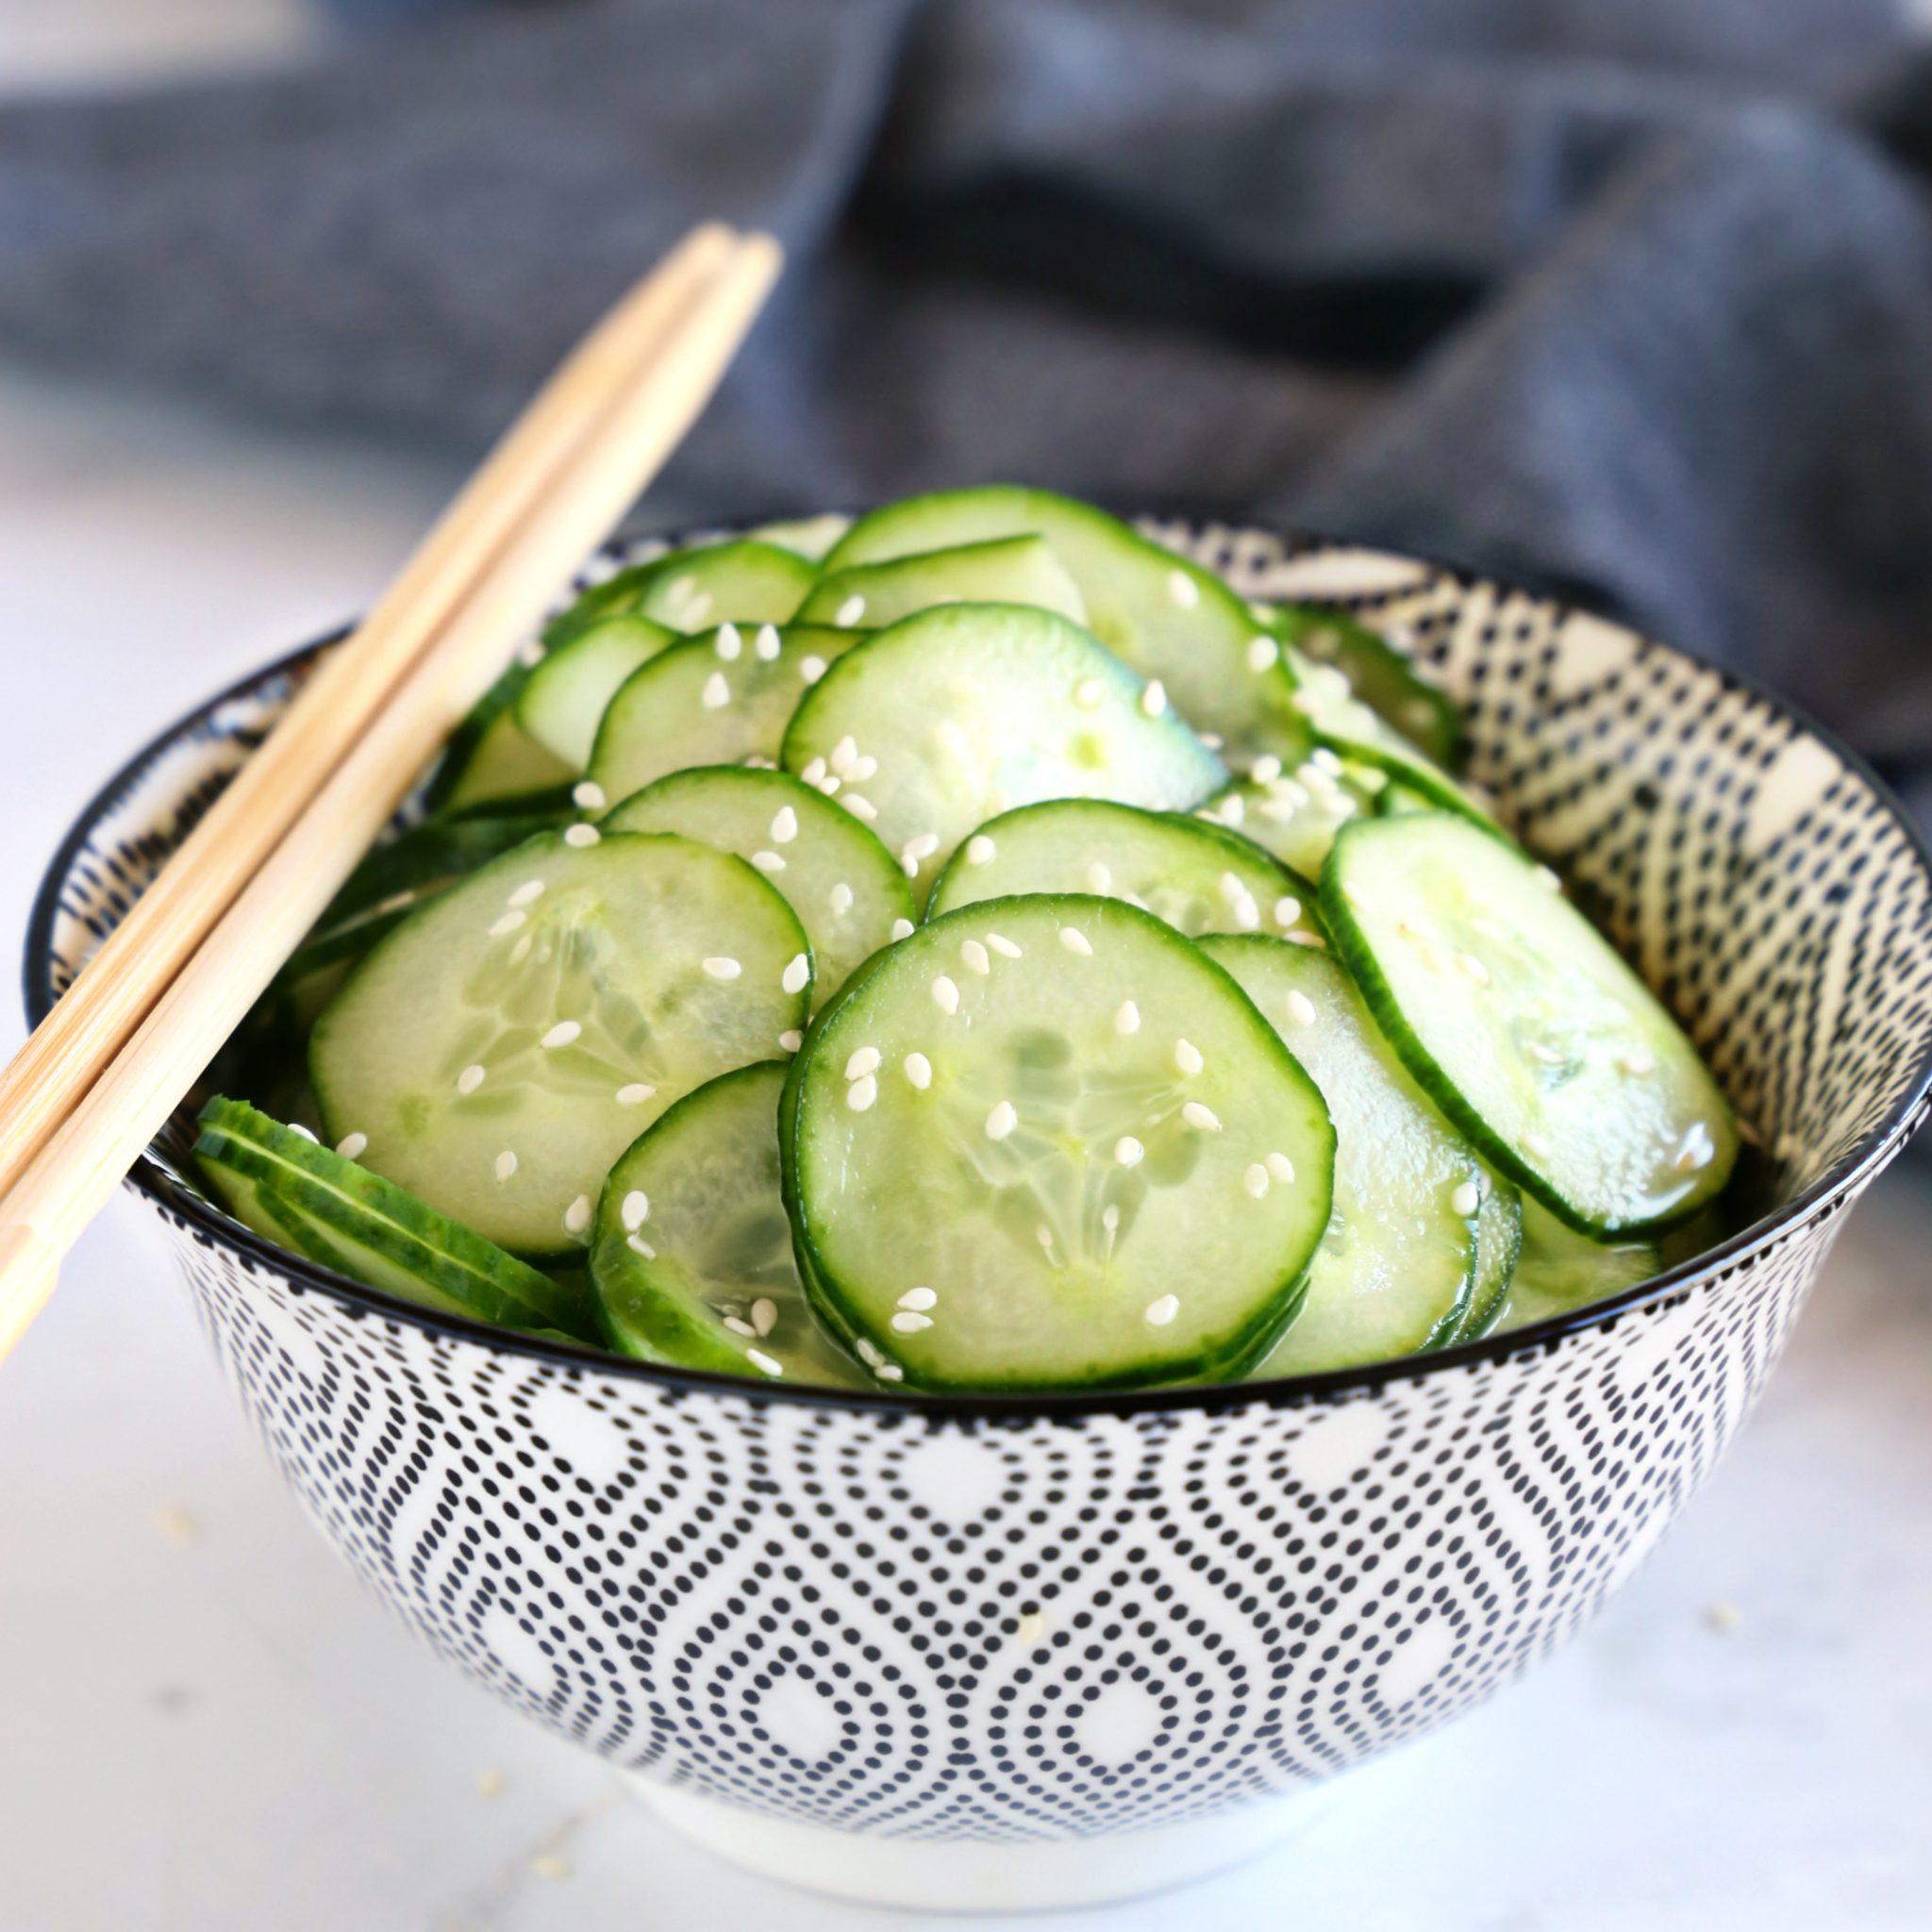 Asian wife with cucumber photo